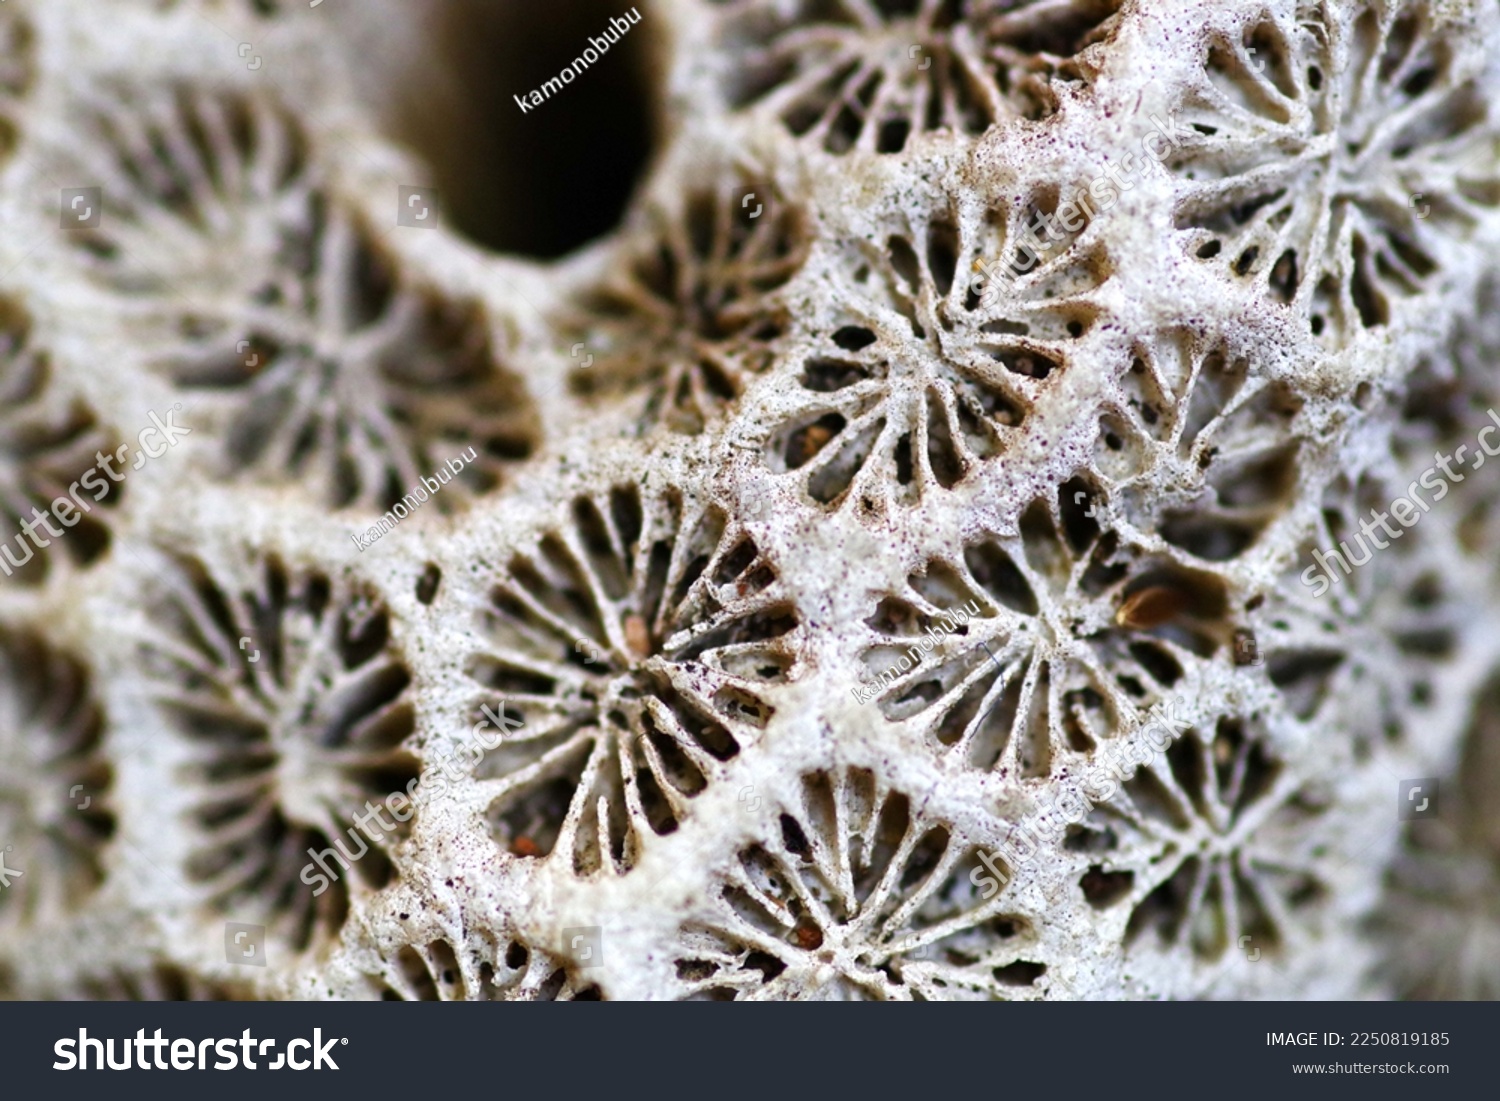 Geometric patterns of bleached corals
 #2250819185